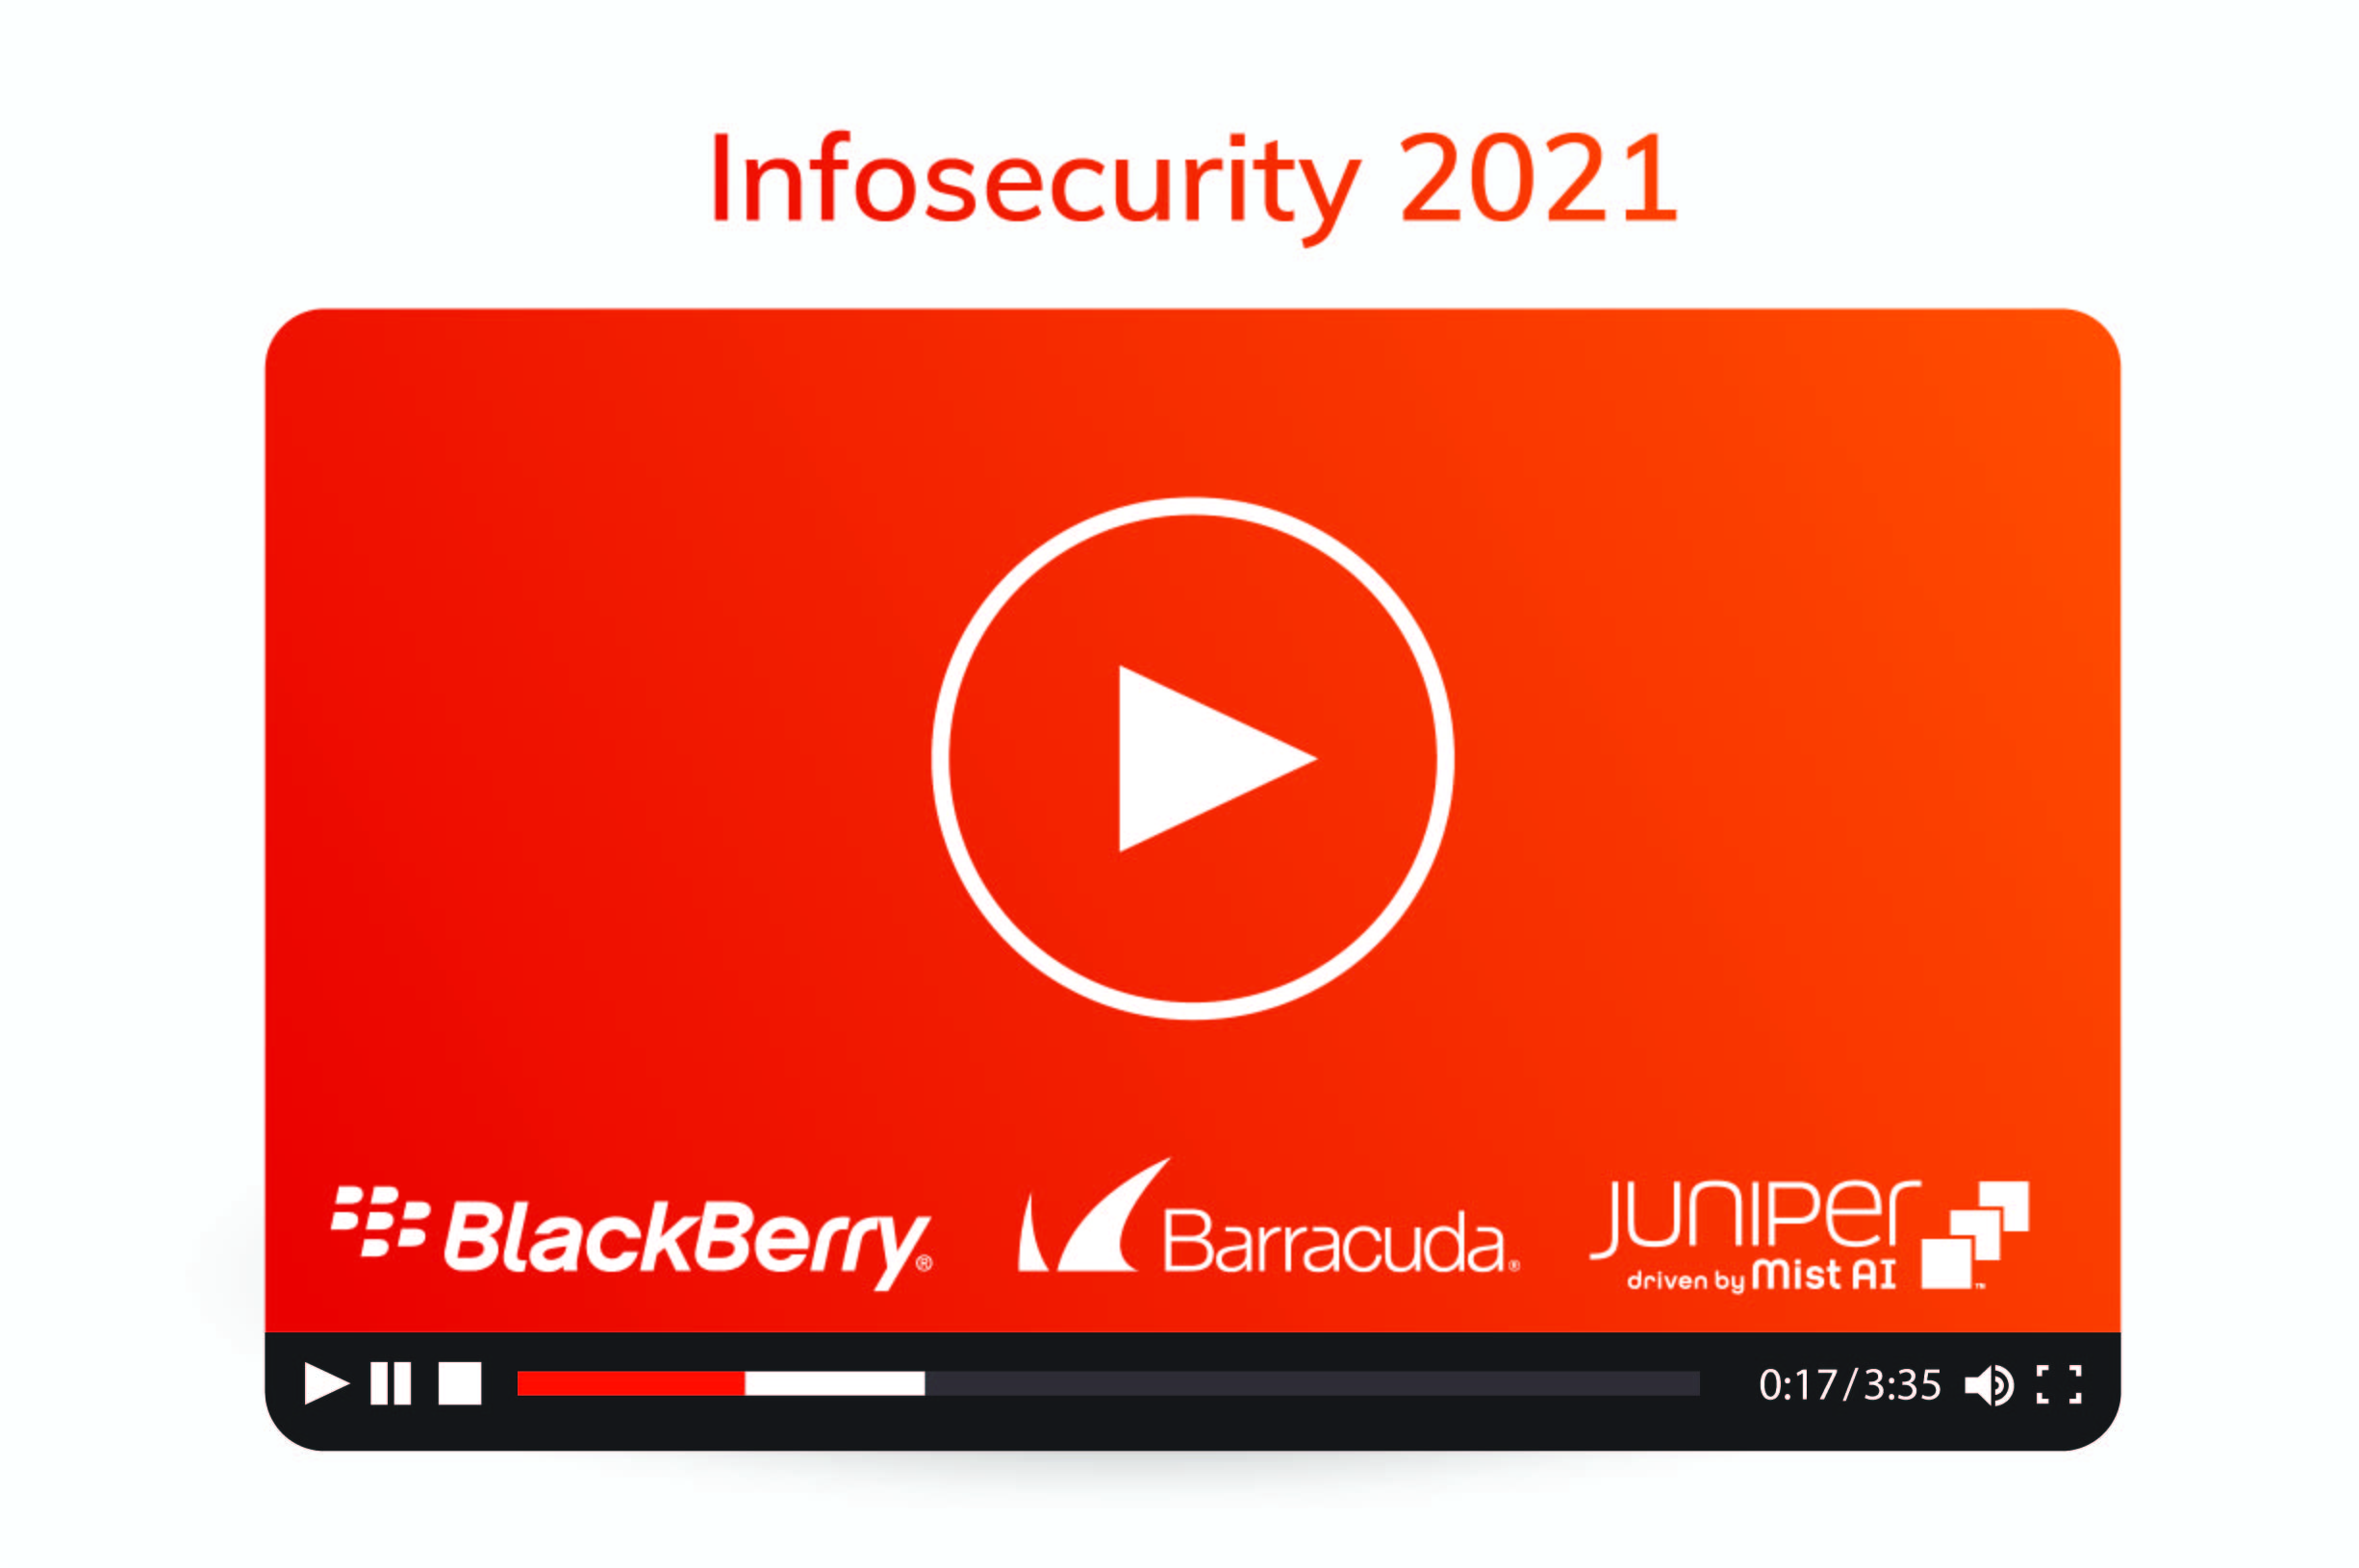 YouTube video Infosecurity 2021